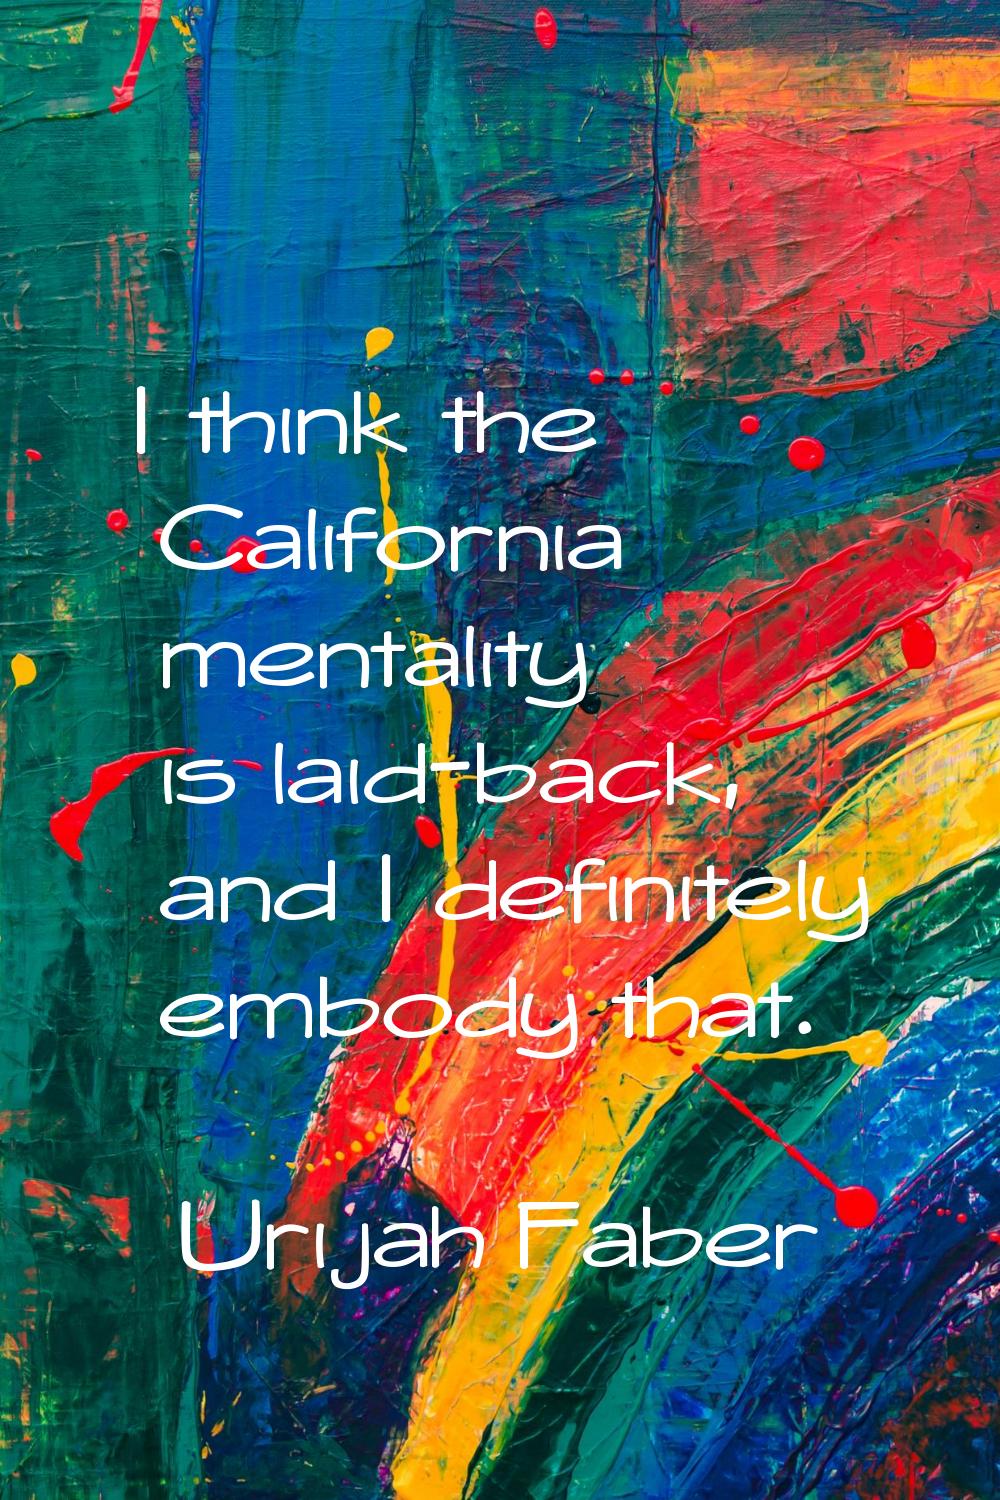 I think the California mentality is laid-back, and I definitely embody that.